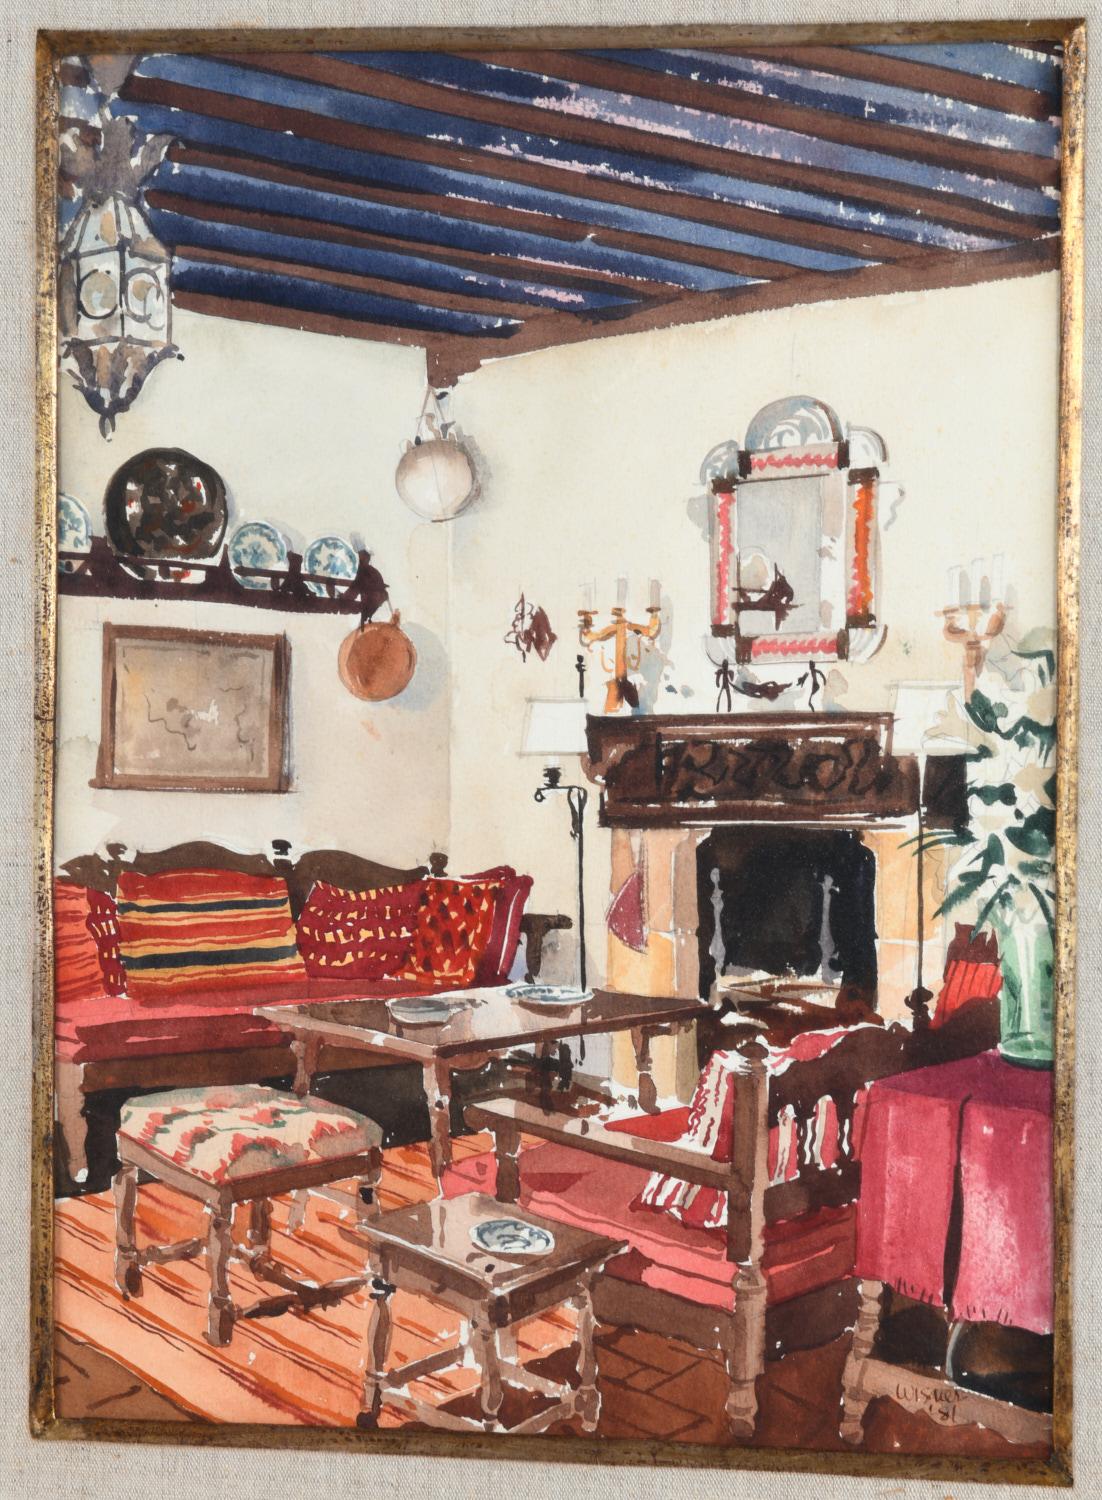 American School (20th c.), Interior scene, watercolor on paper, signed and dated 